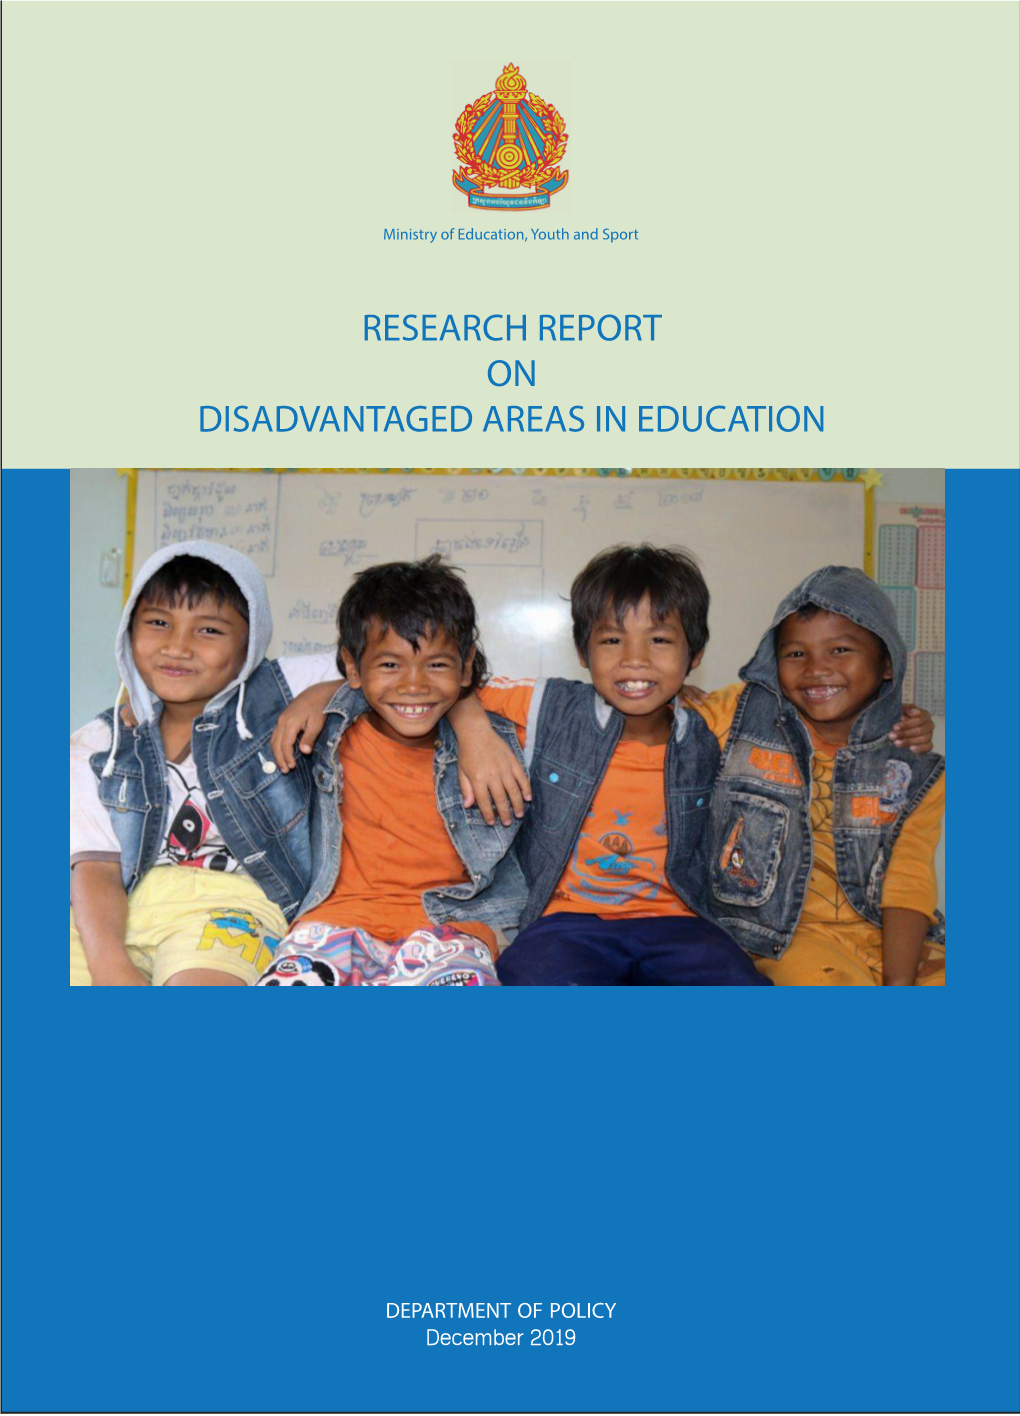 Research Report on Disadvantaged Areas in Education